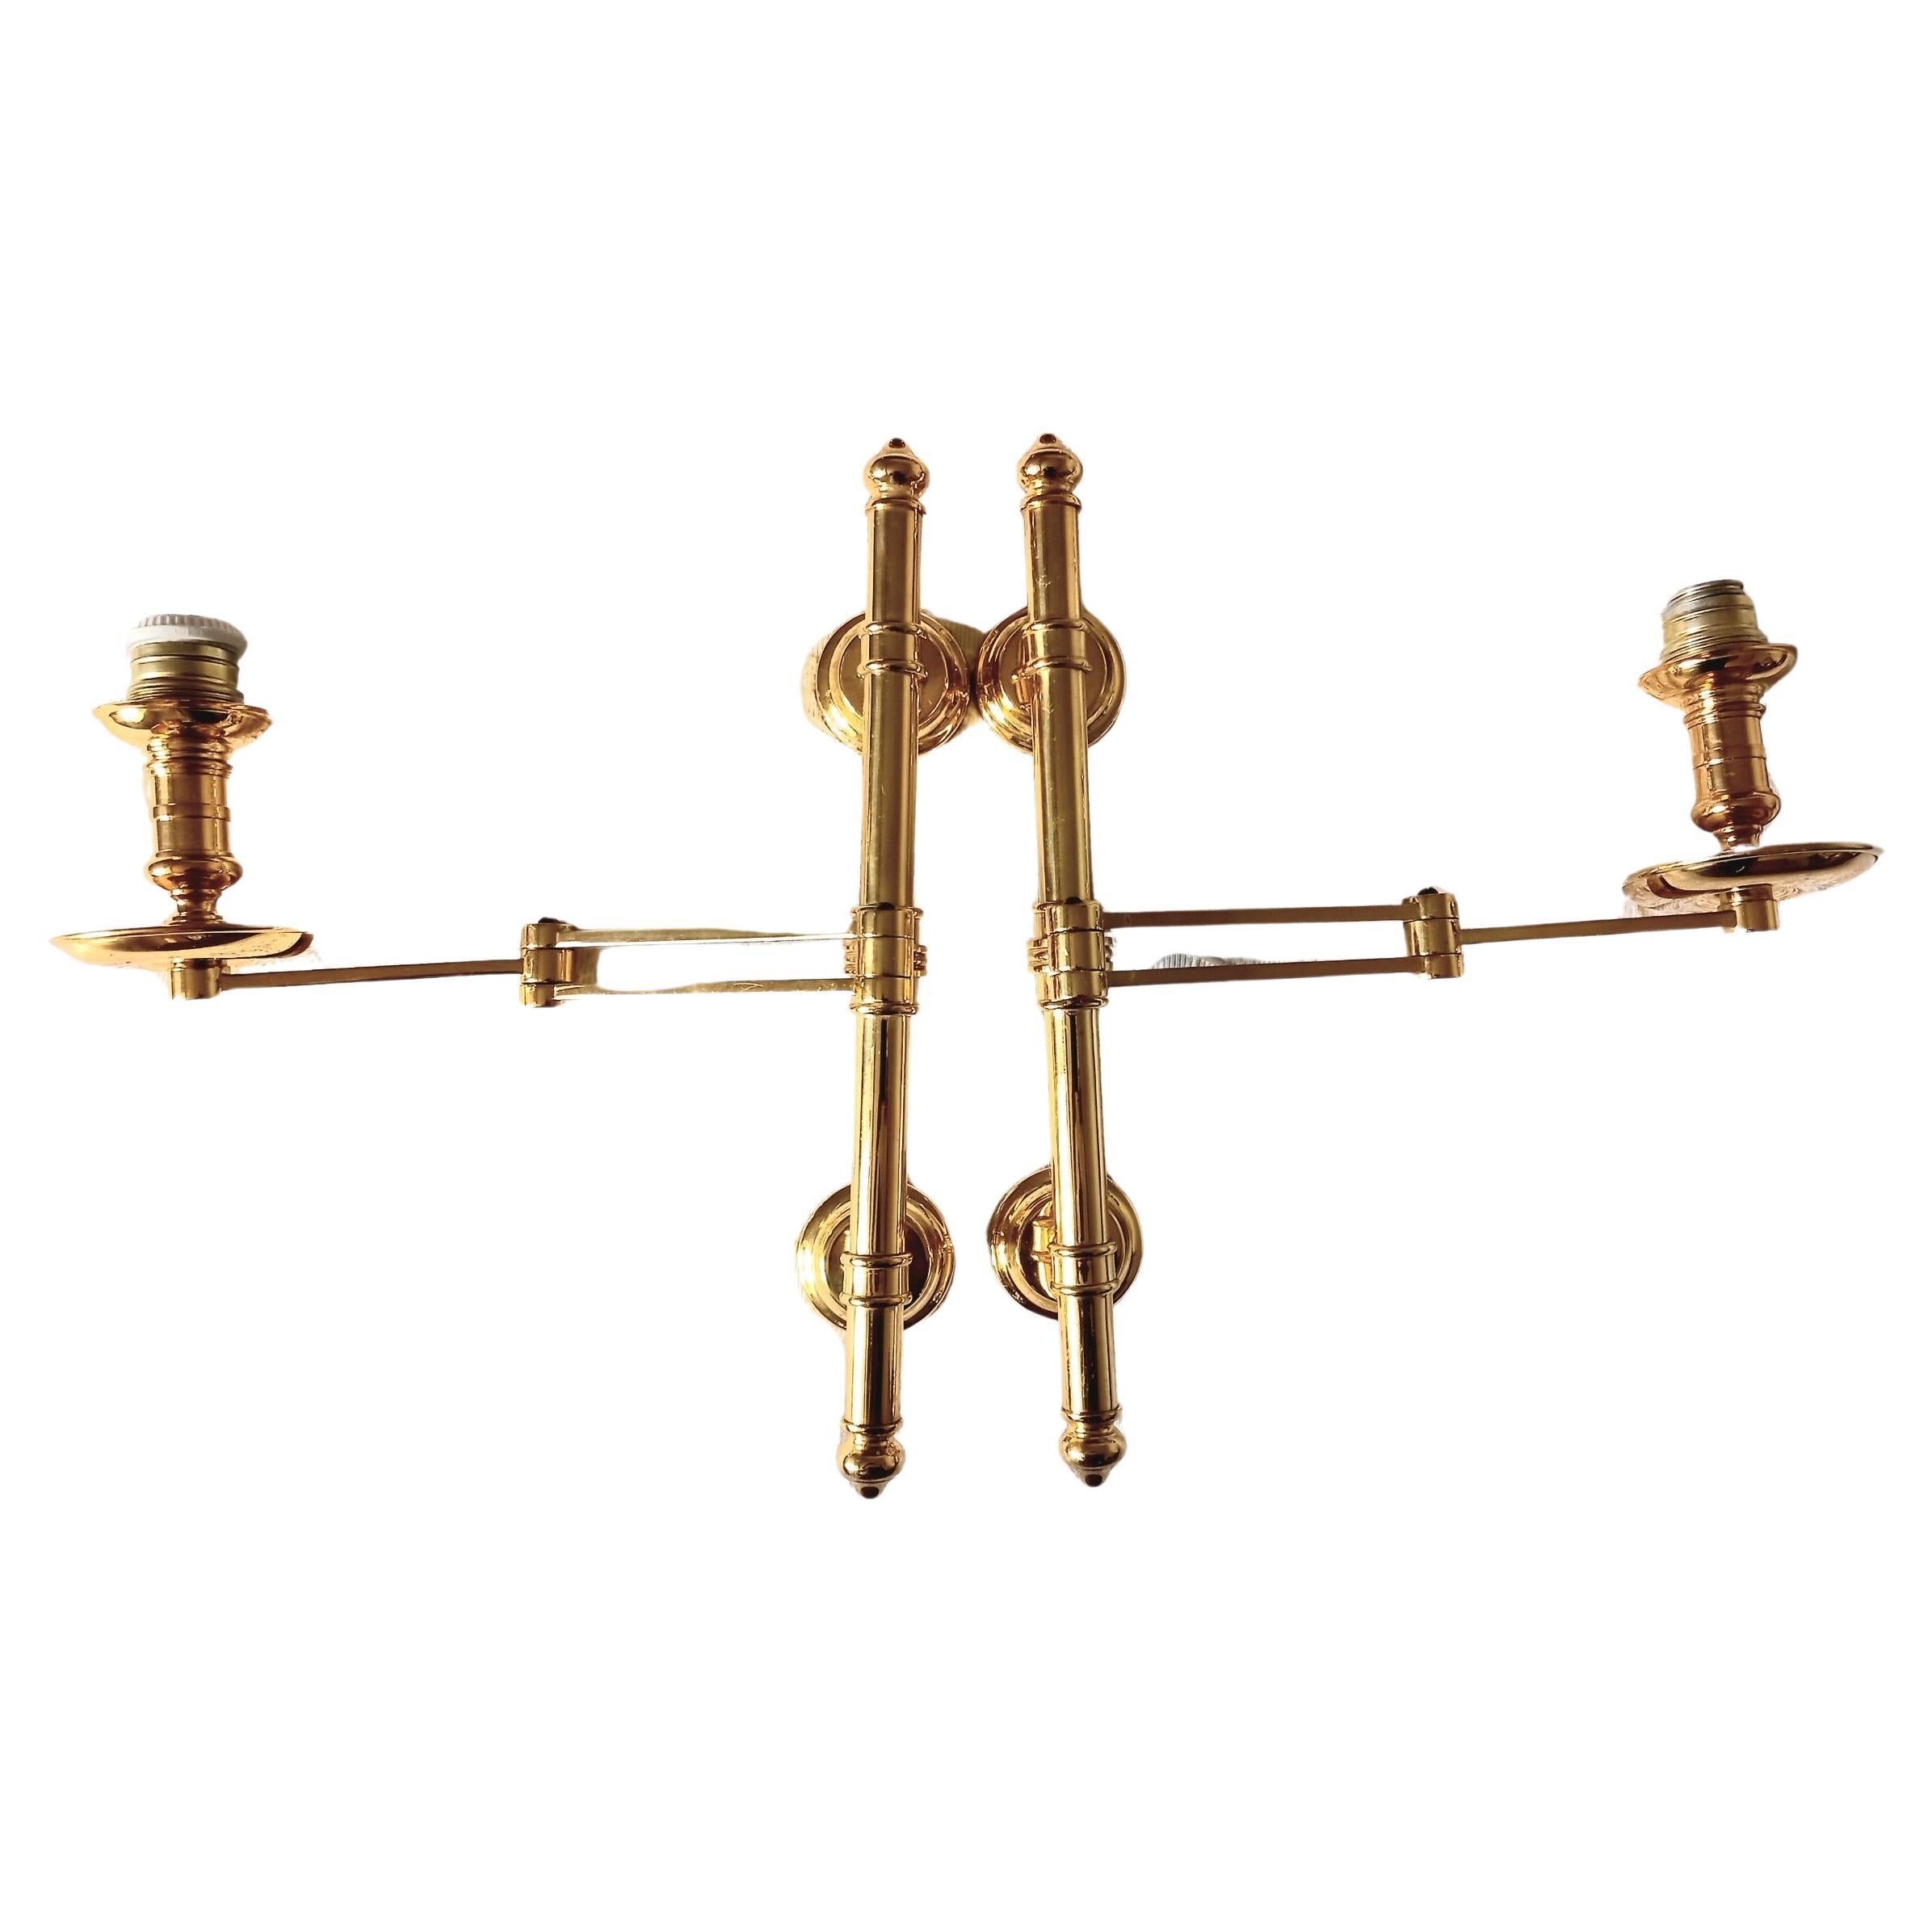  Pair of French Maison Jansen Swing Arm Sconces